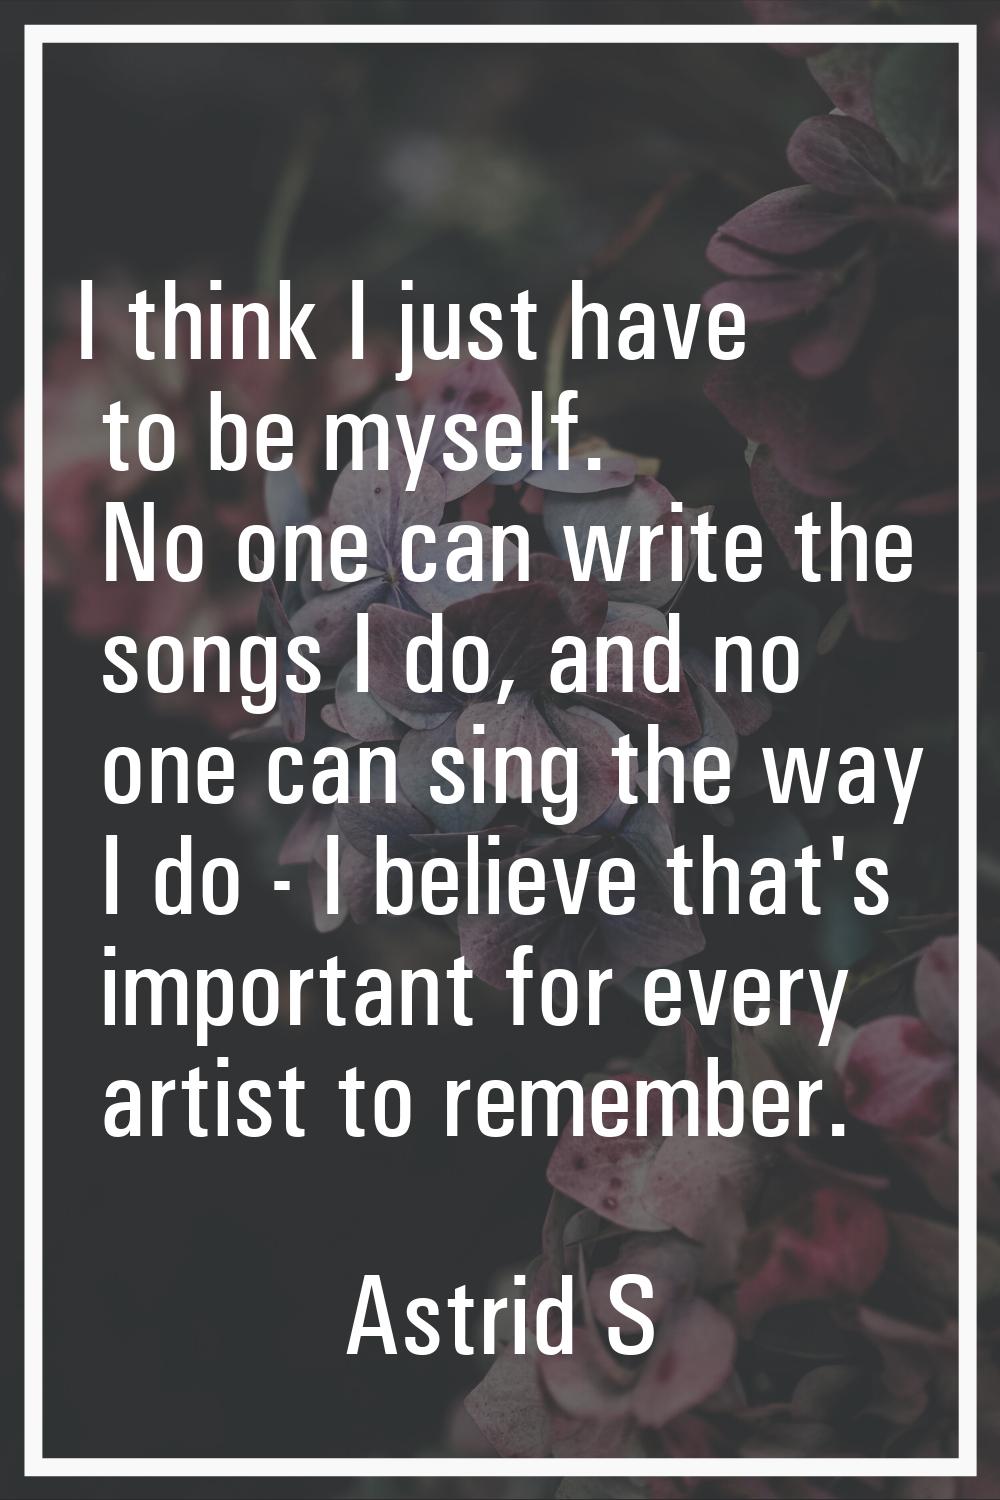 I think I just have to be myself. No one can write the songs I do, and no one can sing the way I do